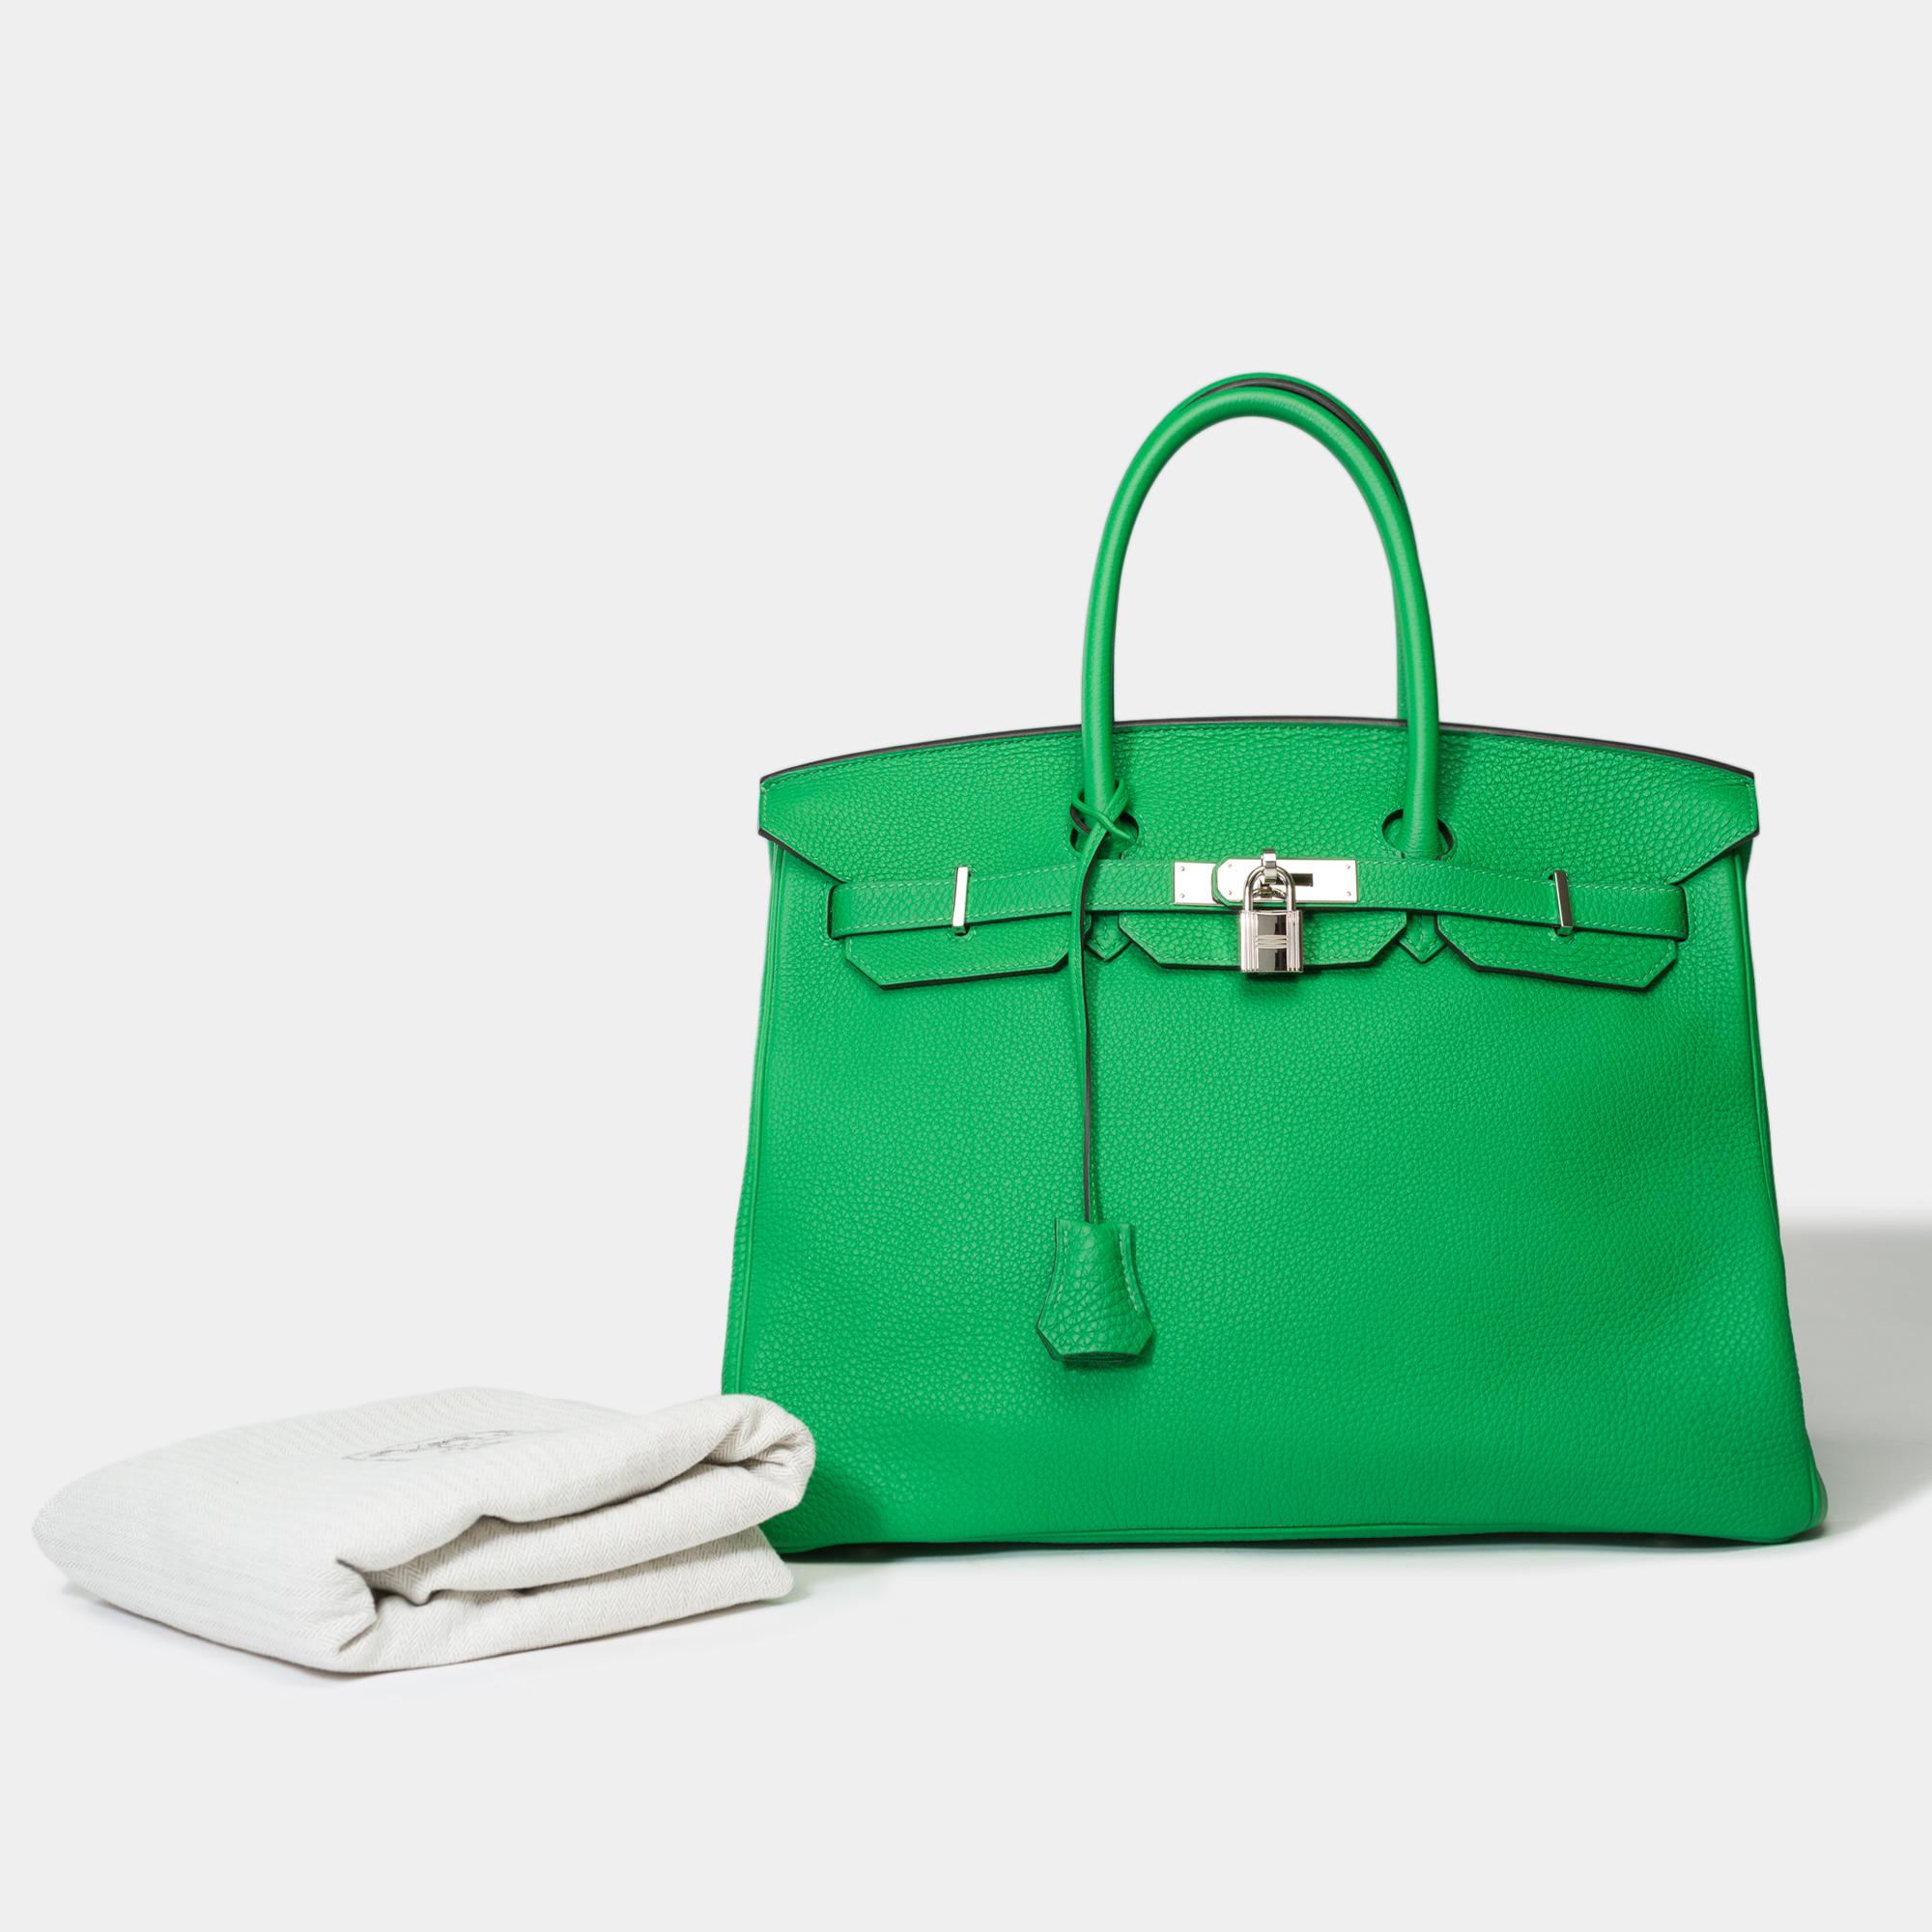 Exquisite​ ​Hermès​ ​Birkin​ ​35​ ​in​ ​green​ ​Bamboo​ ​Togo​ ​leather​ ​,​ ​palladium​ ​silver​ ​metal​ ​trim​ ​,​ ​double​ ​handle​ ​in​ ​green​ ​leather​ ​allowing​ ​hand​ ​carry

Flap​ ​closure
Green​ ​leather​ ​inner​ ​lining​ ​​ ​,​ ​one​